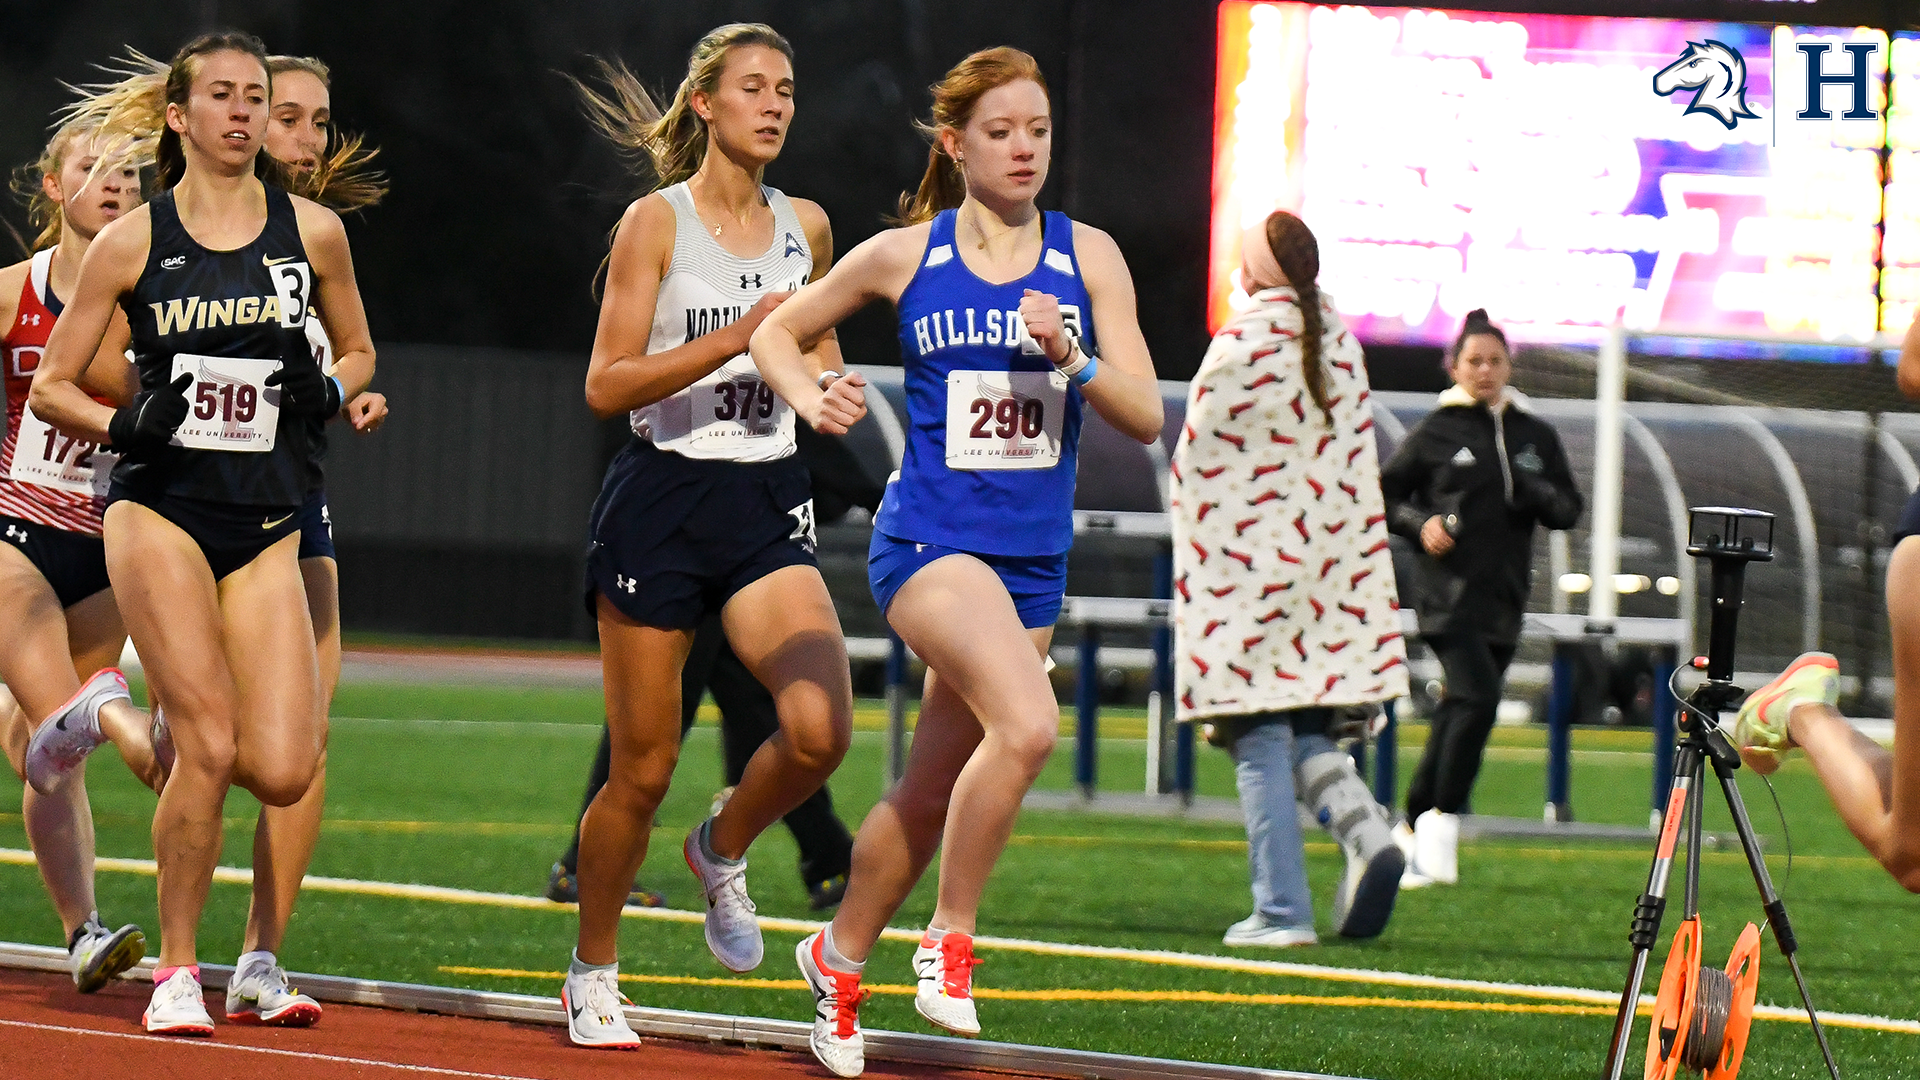 Charger women set up big finale during day 2 of G-MAC Outdoor Championships